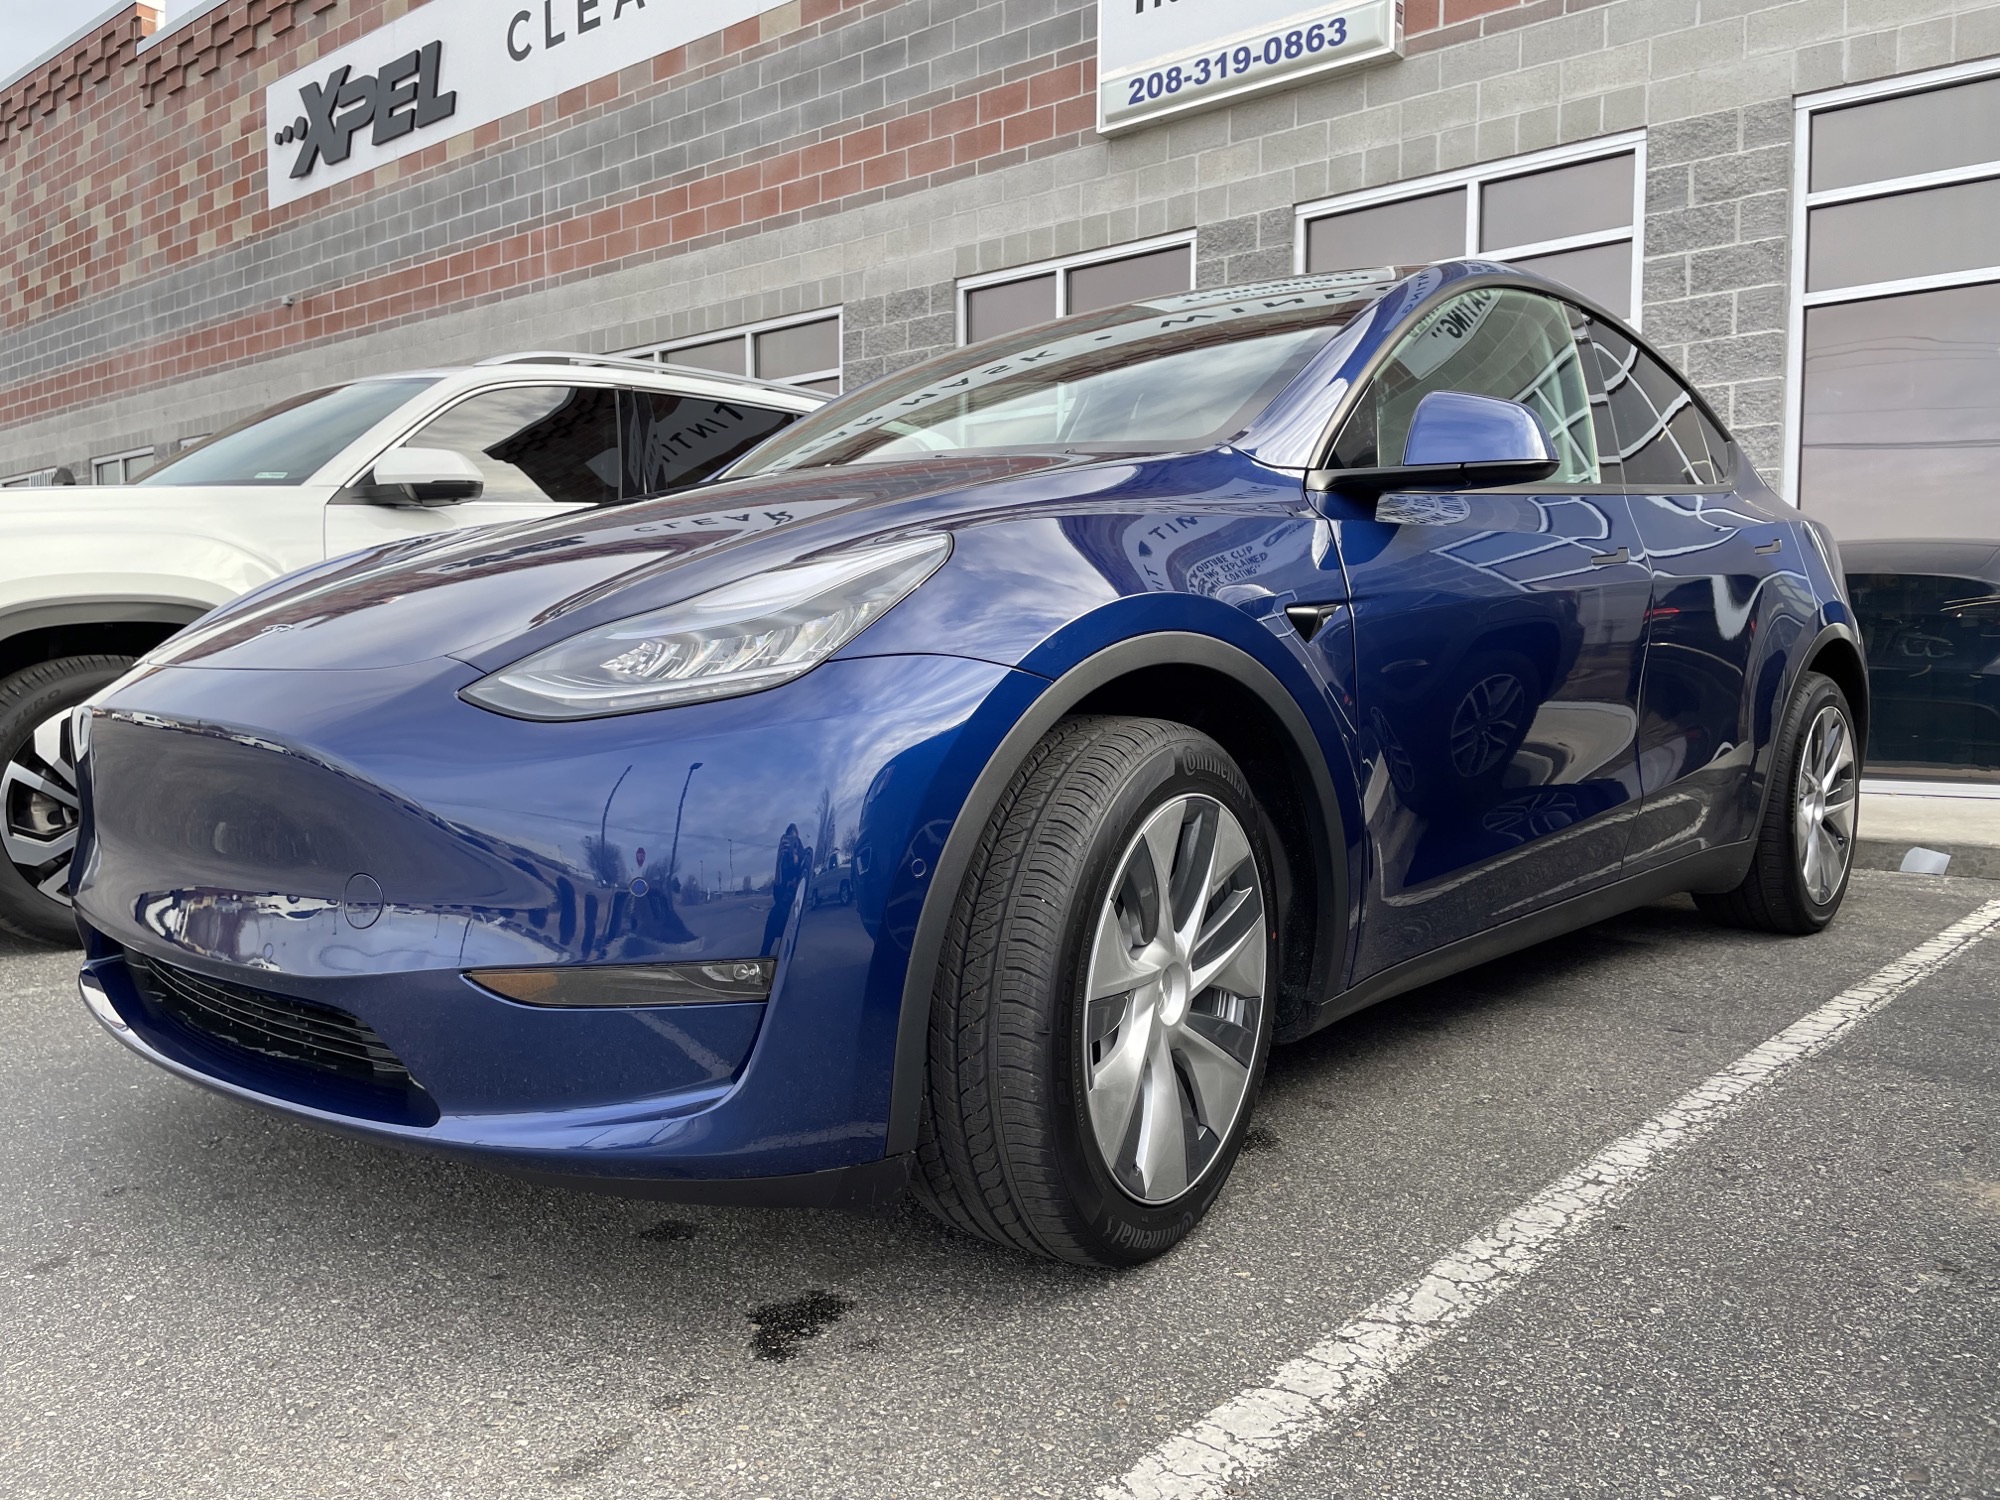 XPEL Boise | Blog | 2021 Tesla Model Y Gets Protected With XPEL PPF